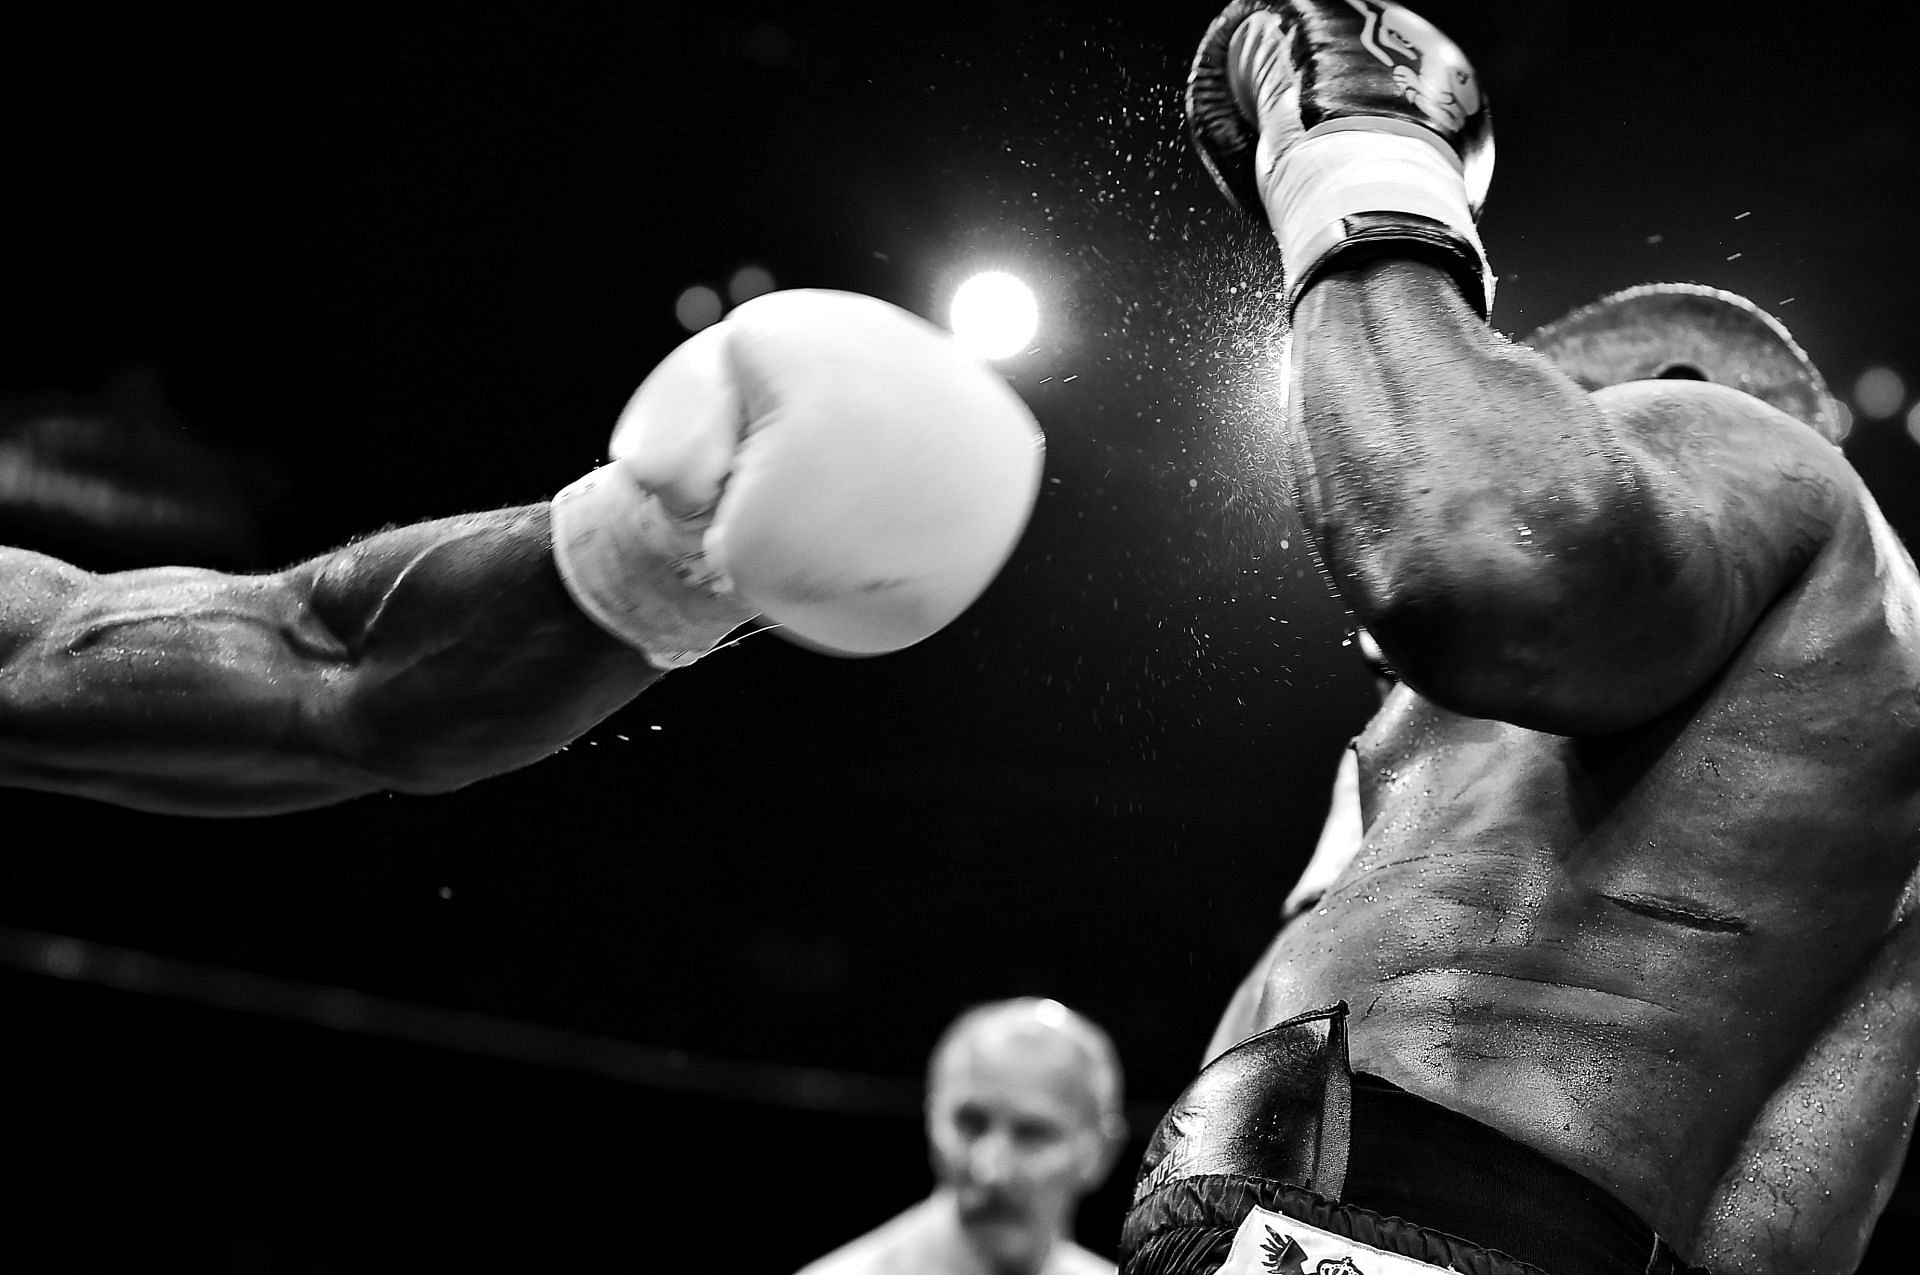 Benefits of boxing: Helps you get rid of the stress (Image by Johann Walter Bantz/Unsplash)